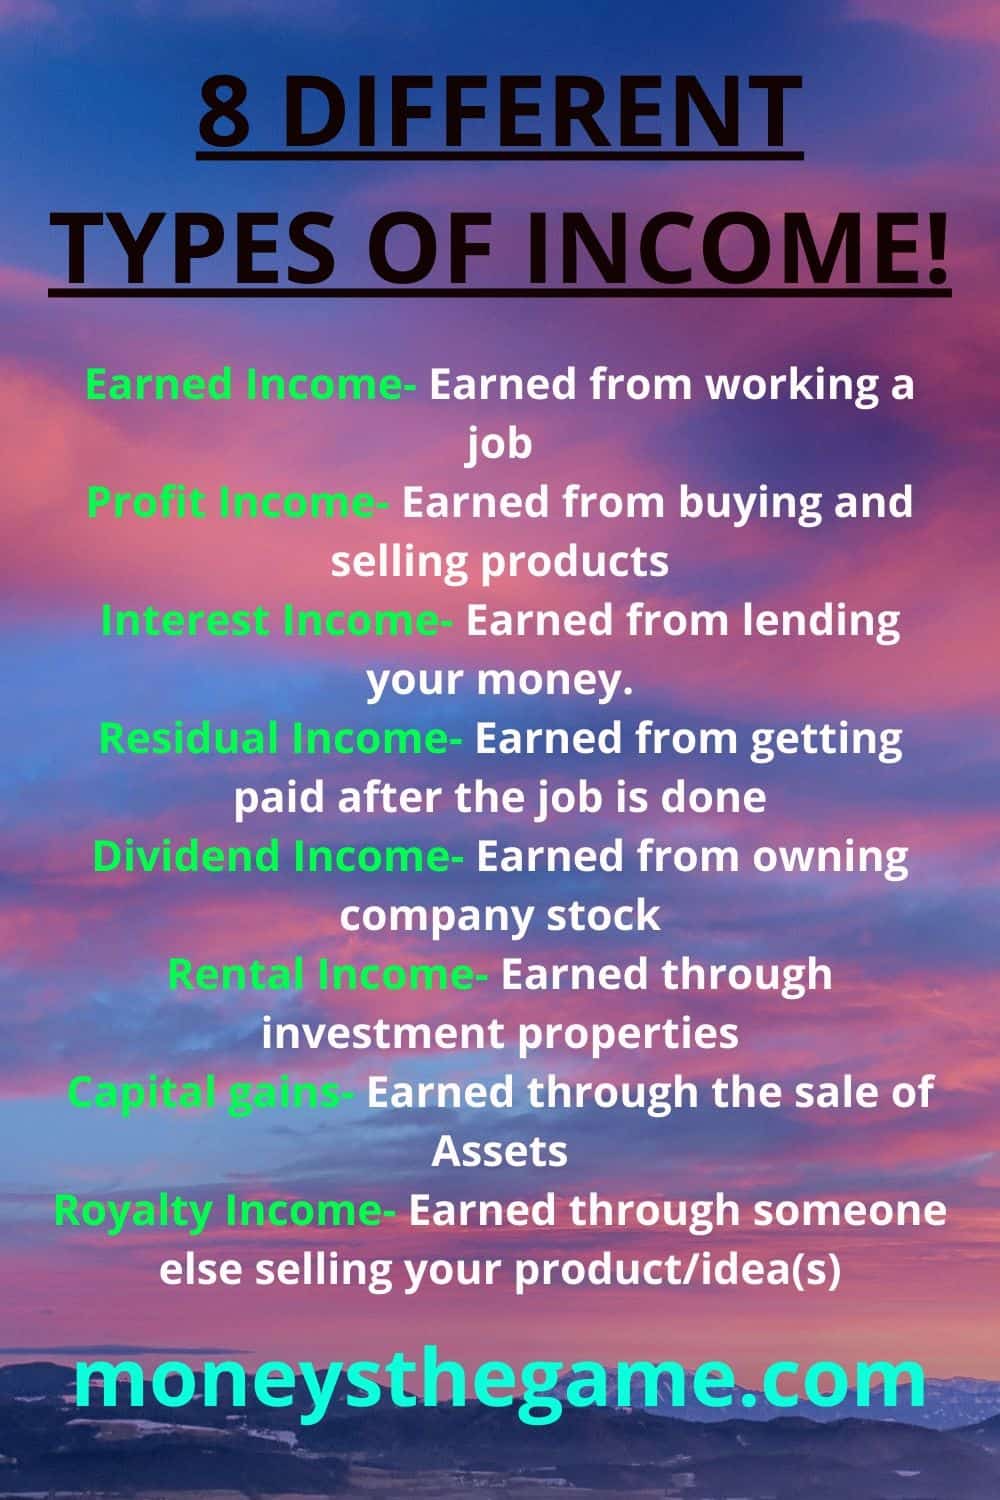 8 Different Types of Income And How You Can Create Each One!